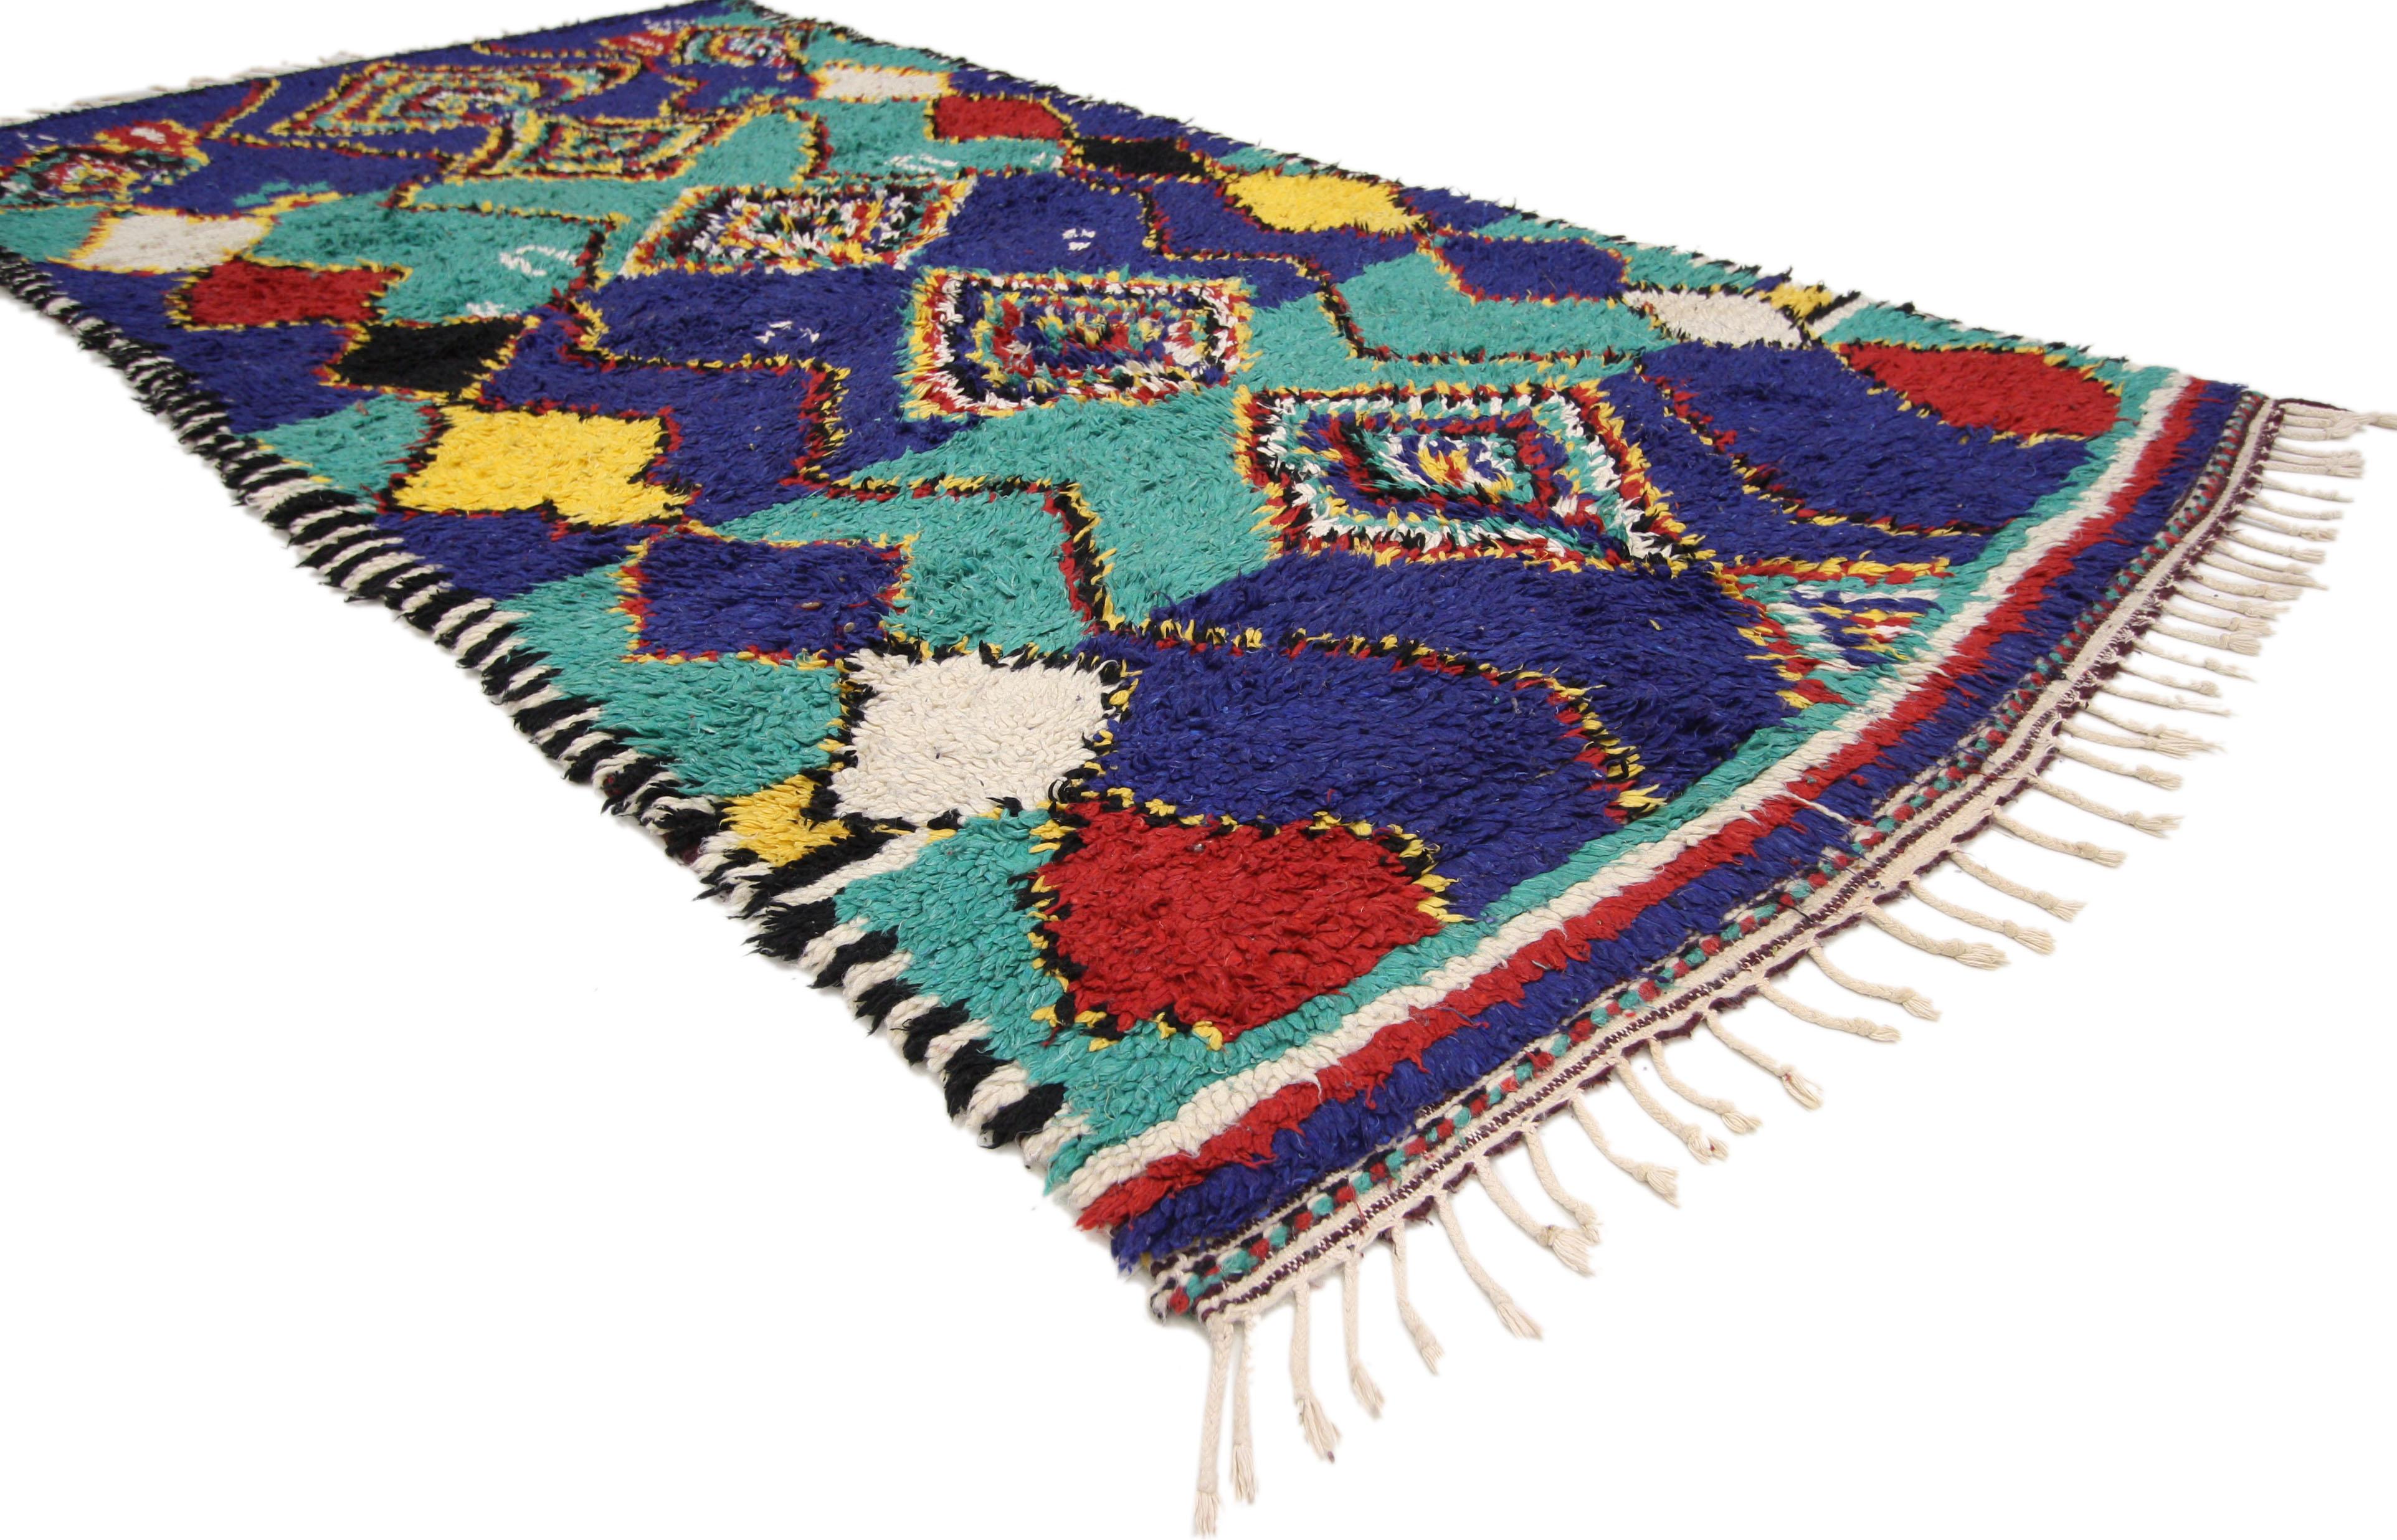 74765 Contemporary Berber Moroccan Rug with Post-Modern Bauhaus Style. This hand knotted wool contemporary Berber Moroccan area rug with Postmodern Bauhaus style features a center row of stacked diamonds within diamonds flanked by zigzag lines